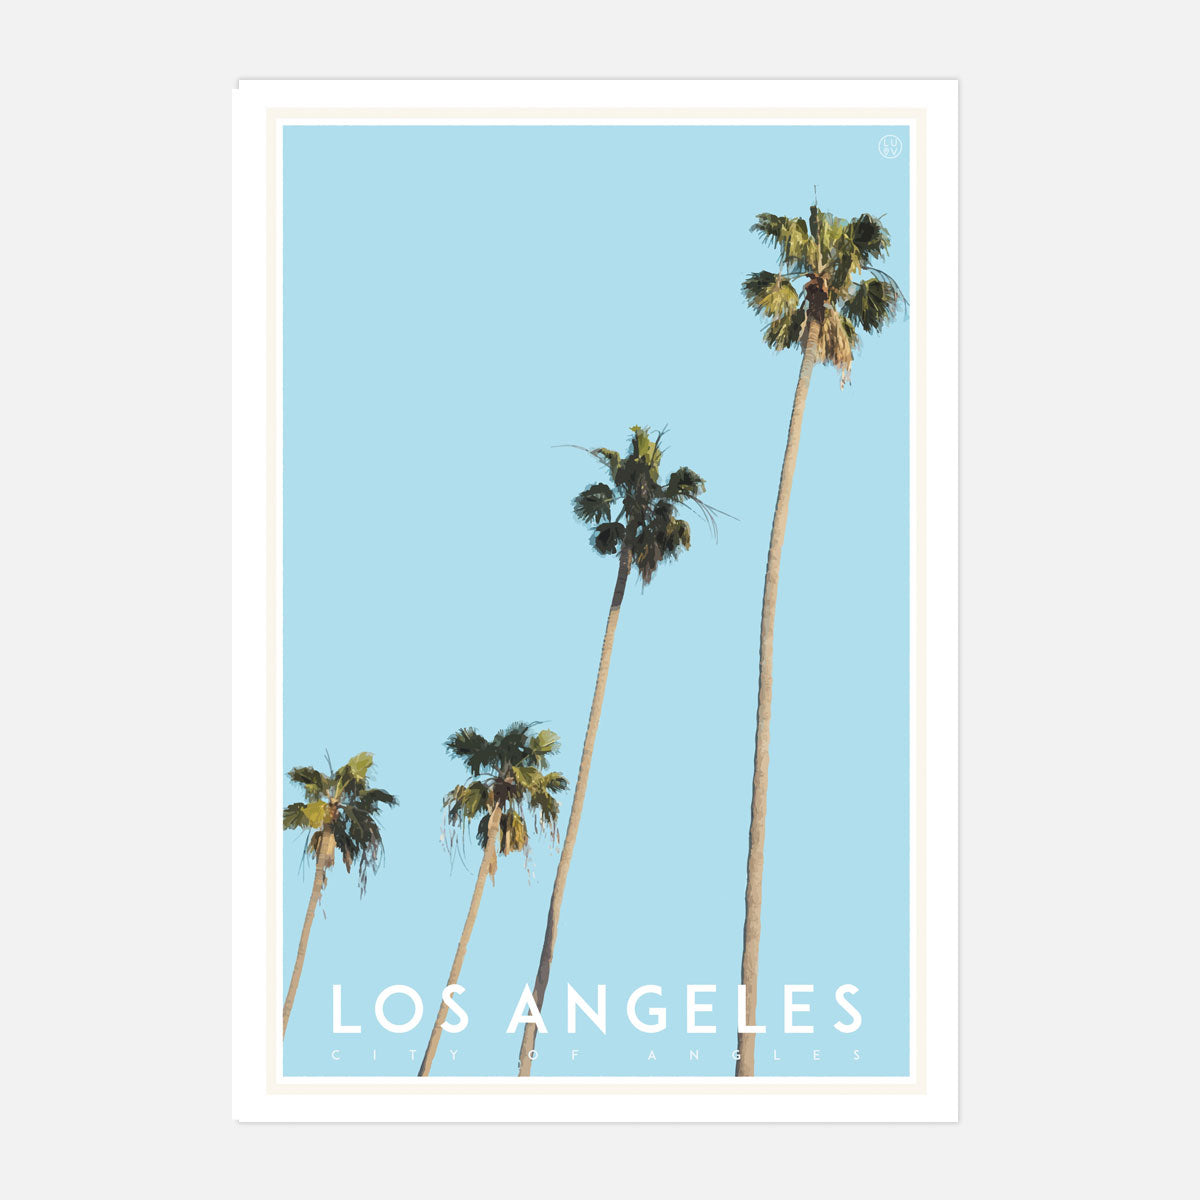 Los Angeles vintage travel style poster by Placesweluv